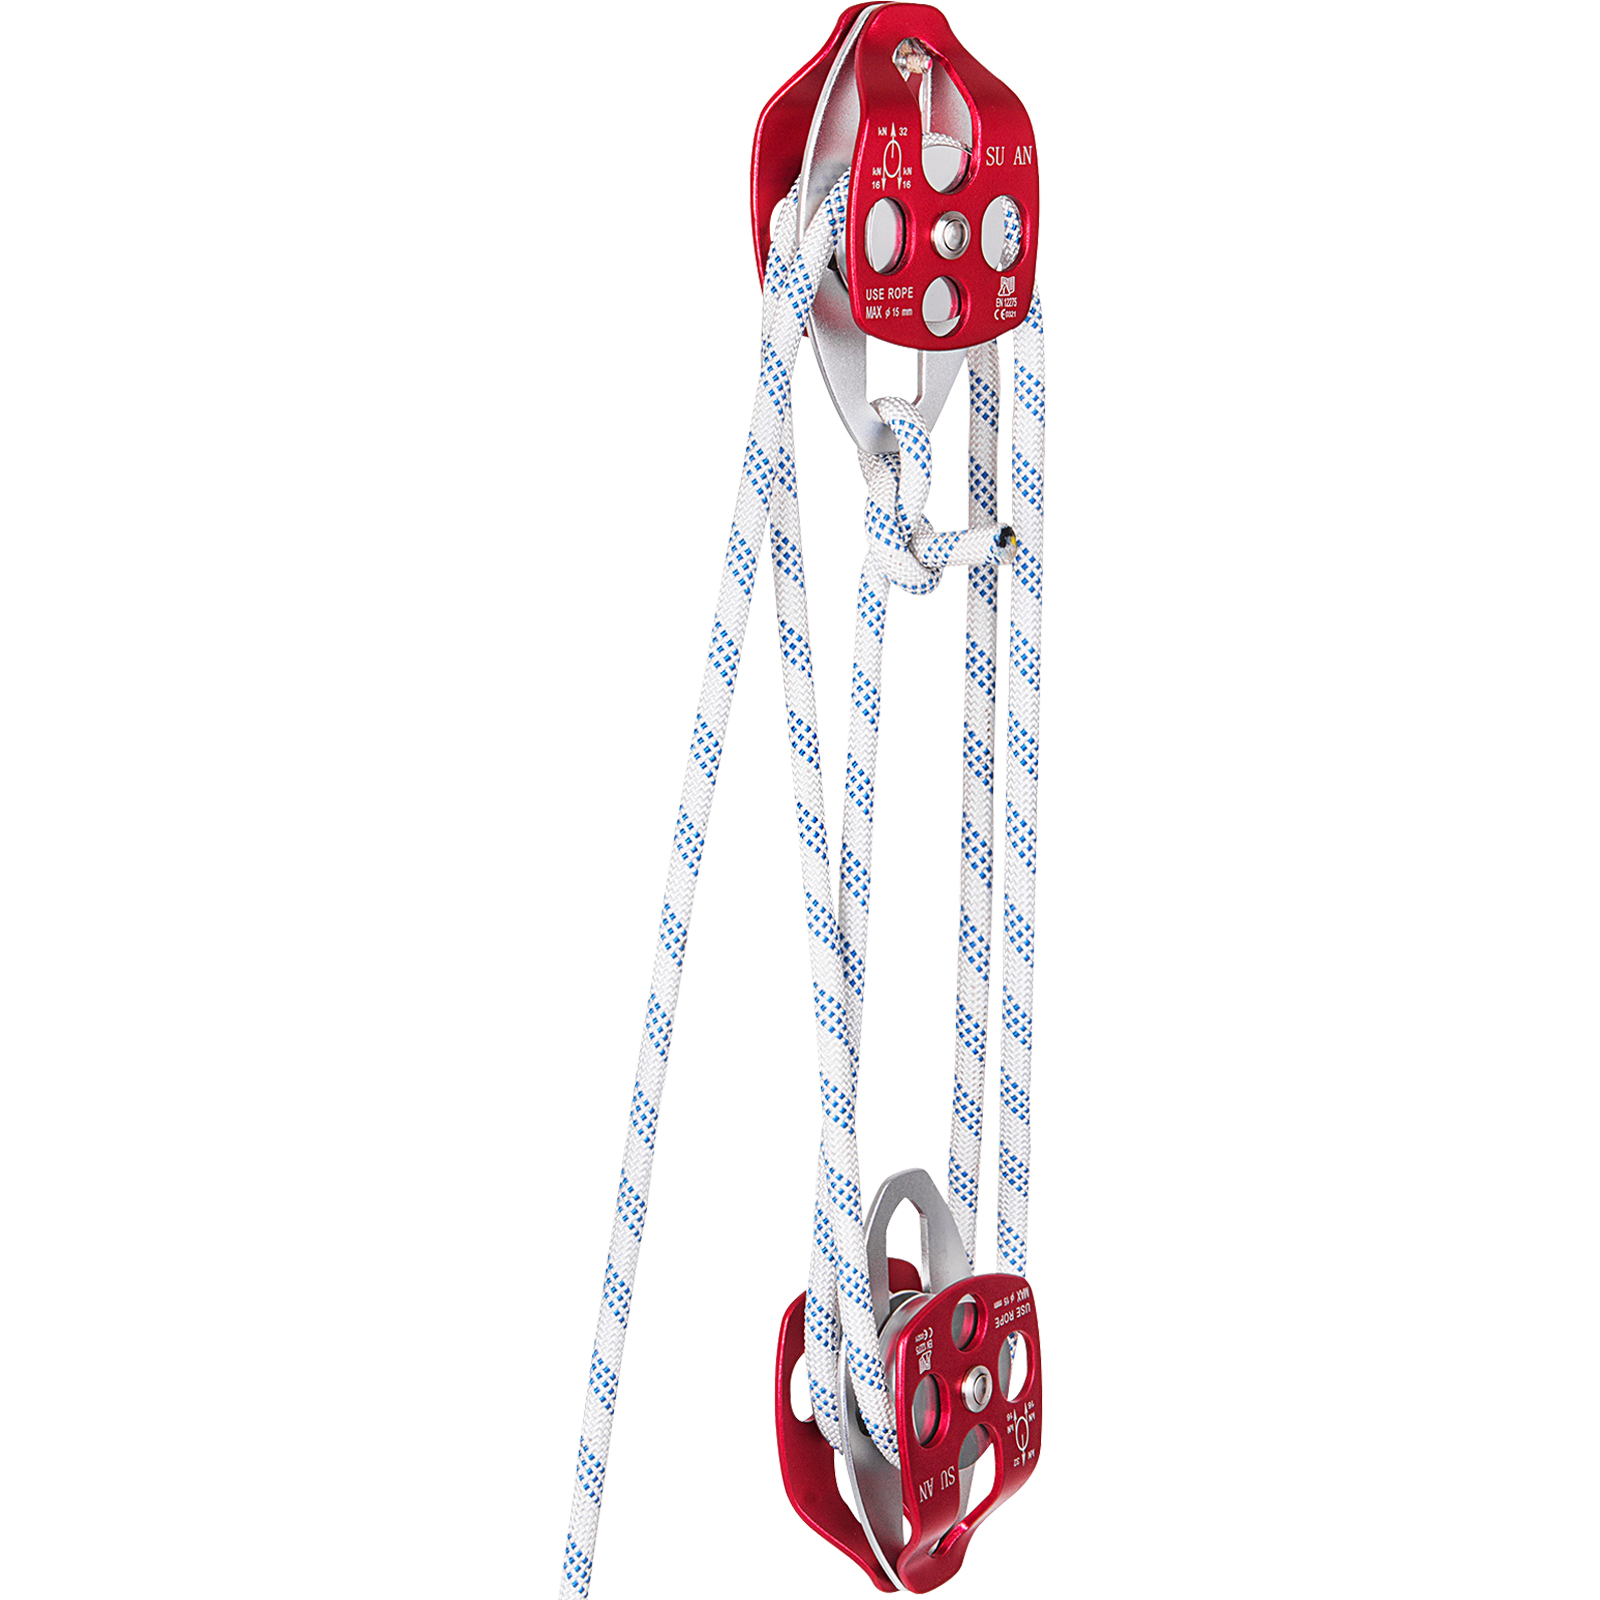 Twin Sheave Block And Tackle 7500lb Pulley System 200 Feet 1/2 Double Braid Rope от Vevor Many GEOs